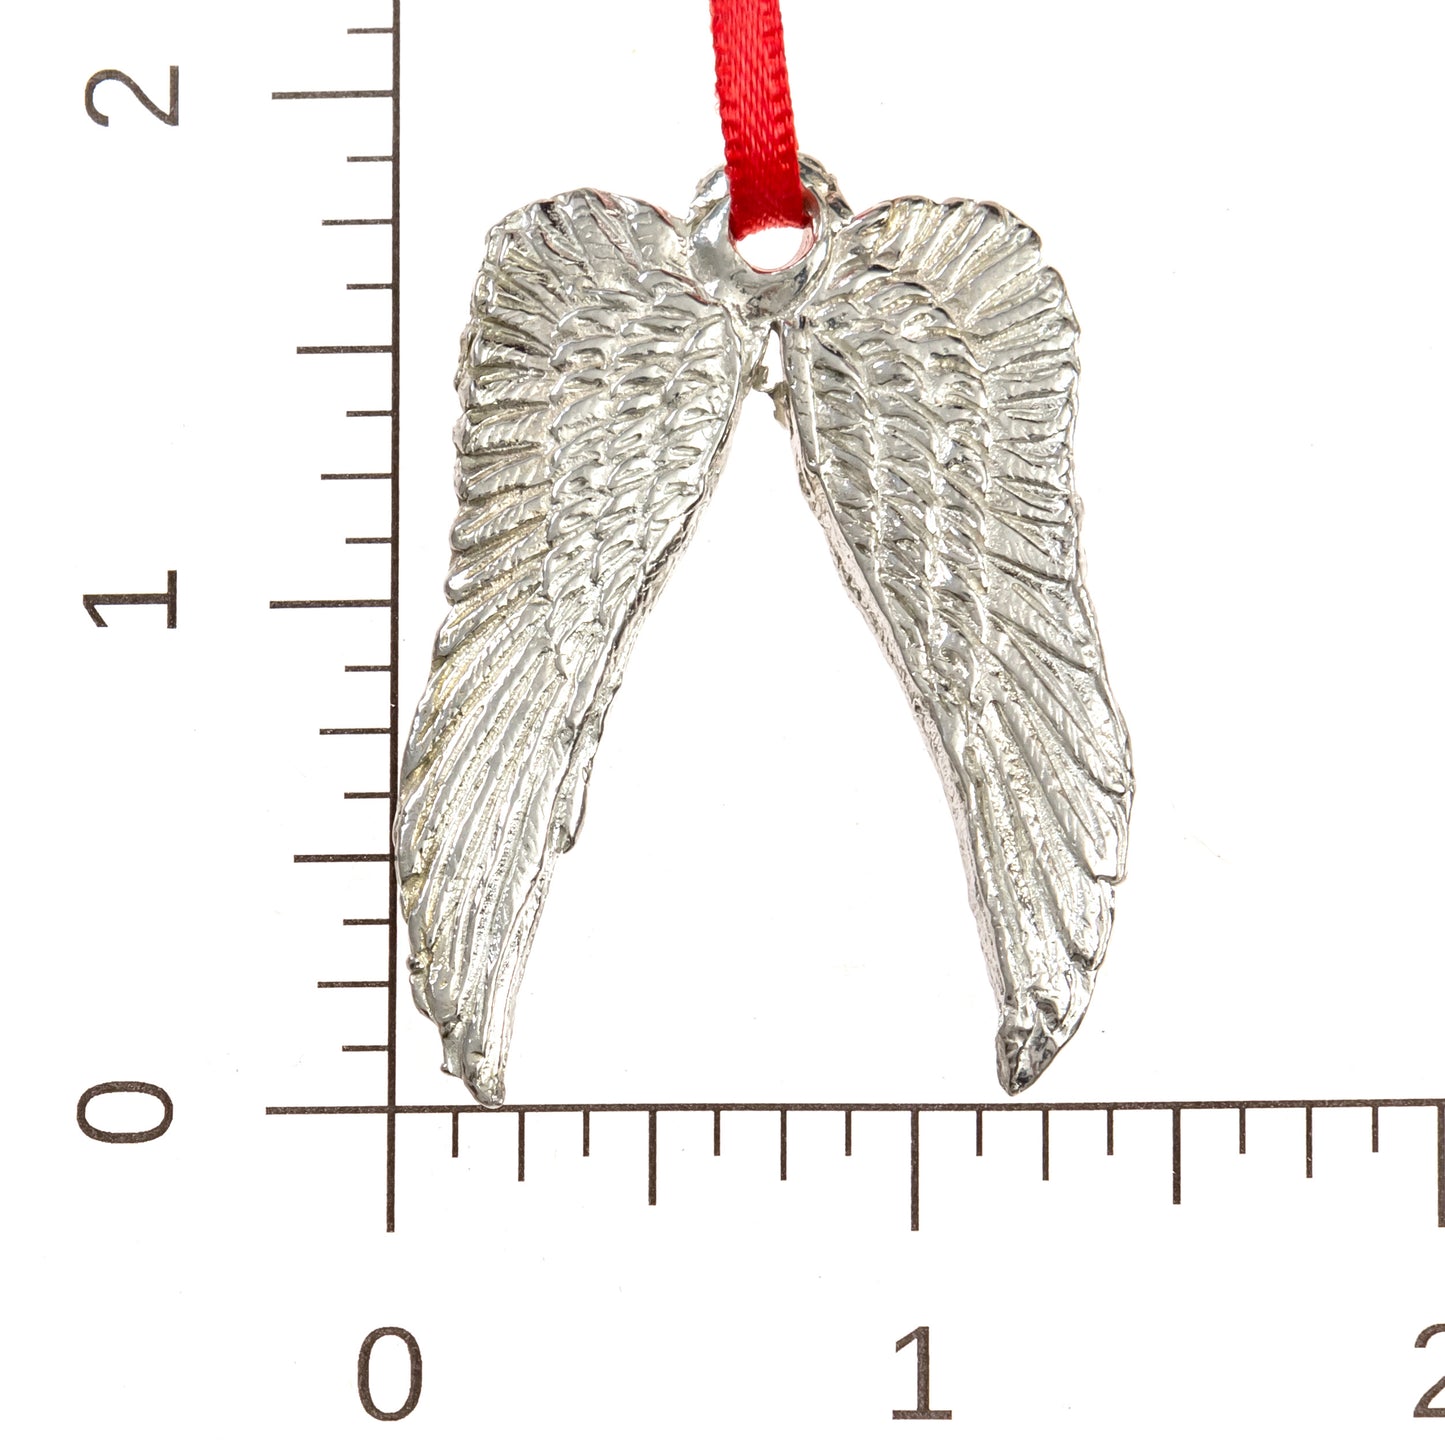 Angel Christmas Ornament or Pendant - Religious Gift - Wide Range of Designs and Sizes